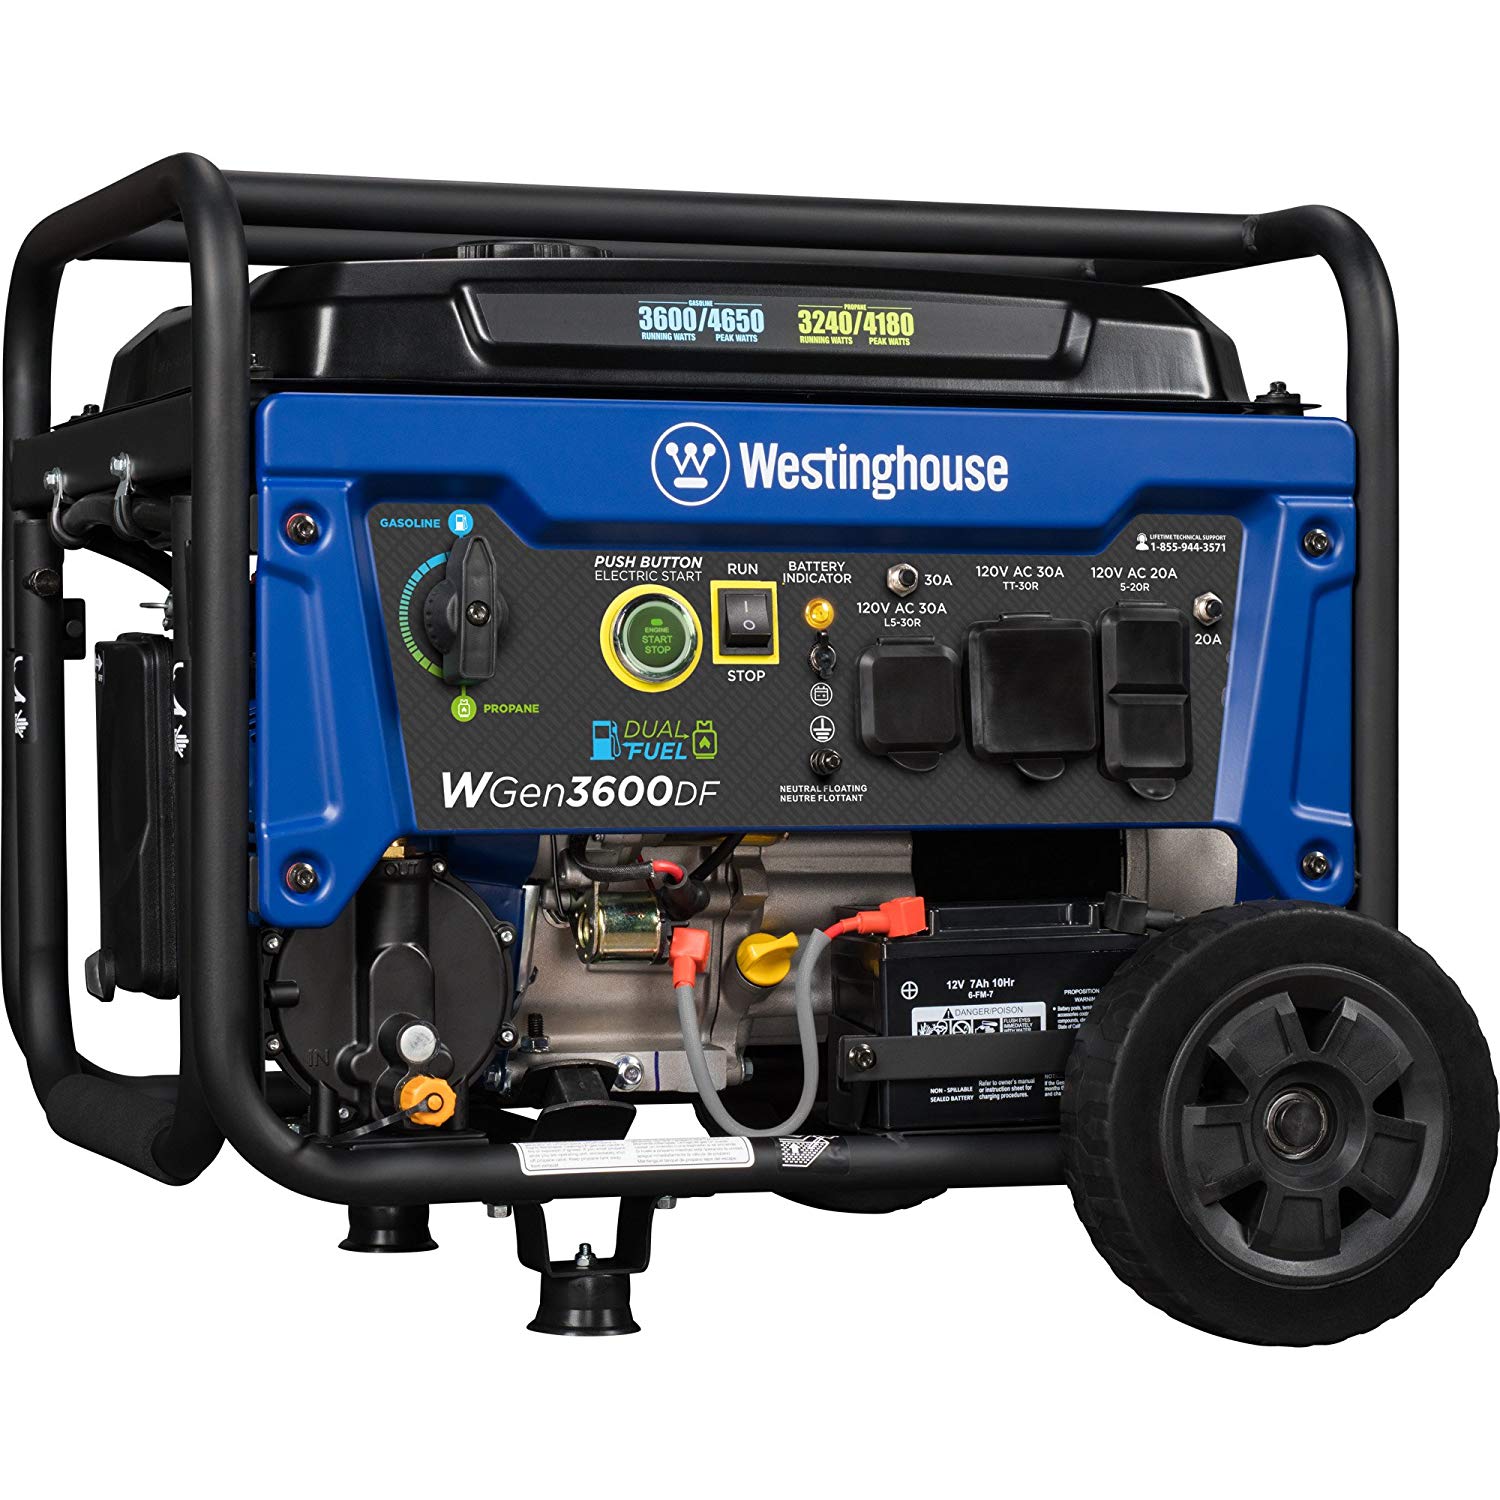 If you’re looking for a generator for your home or for use on the go for an RV or worksite, consider a generator that runs on propane